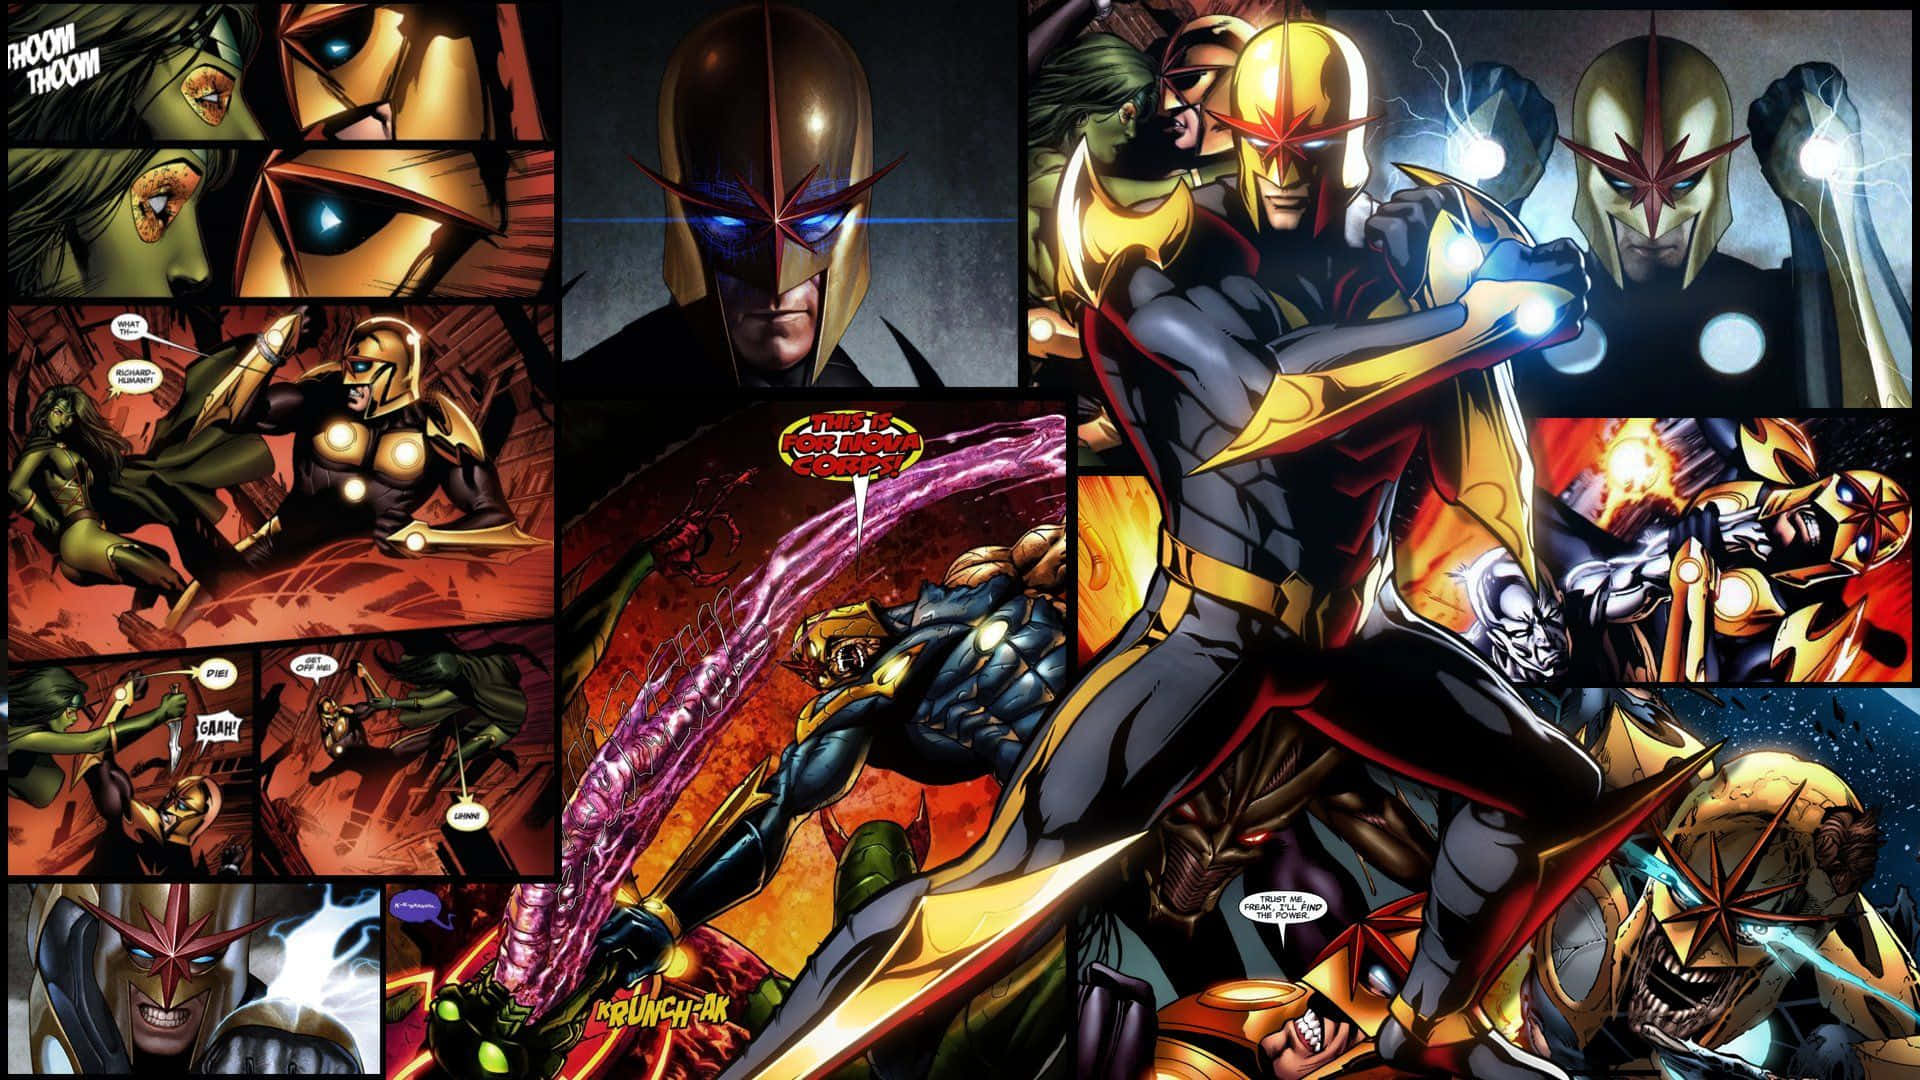 – Guardians of the Galaxy With Nova Corps Wallpaper